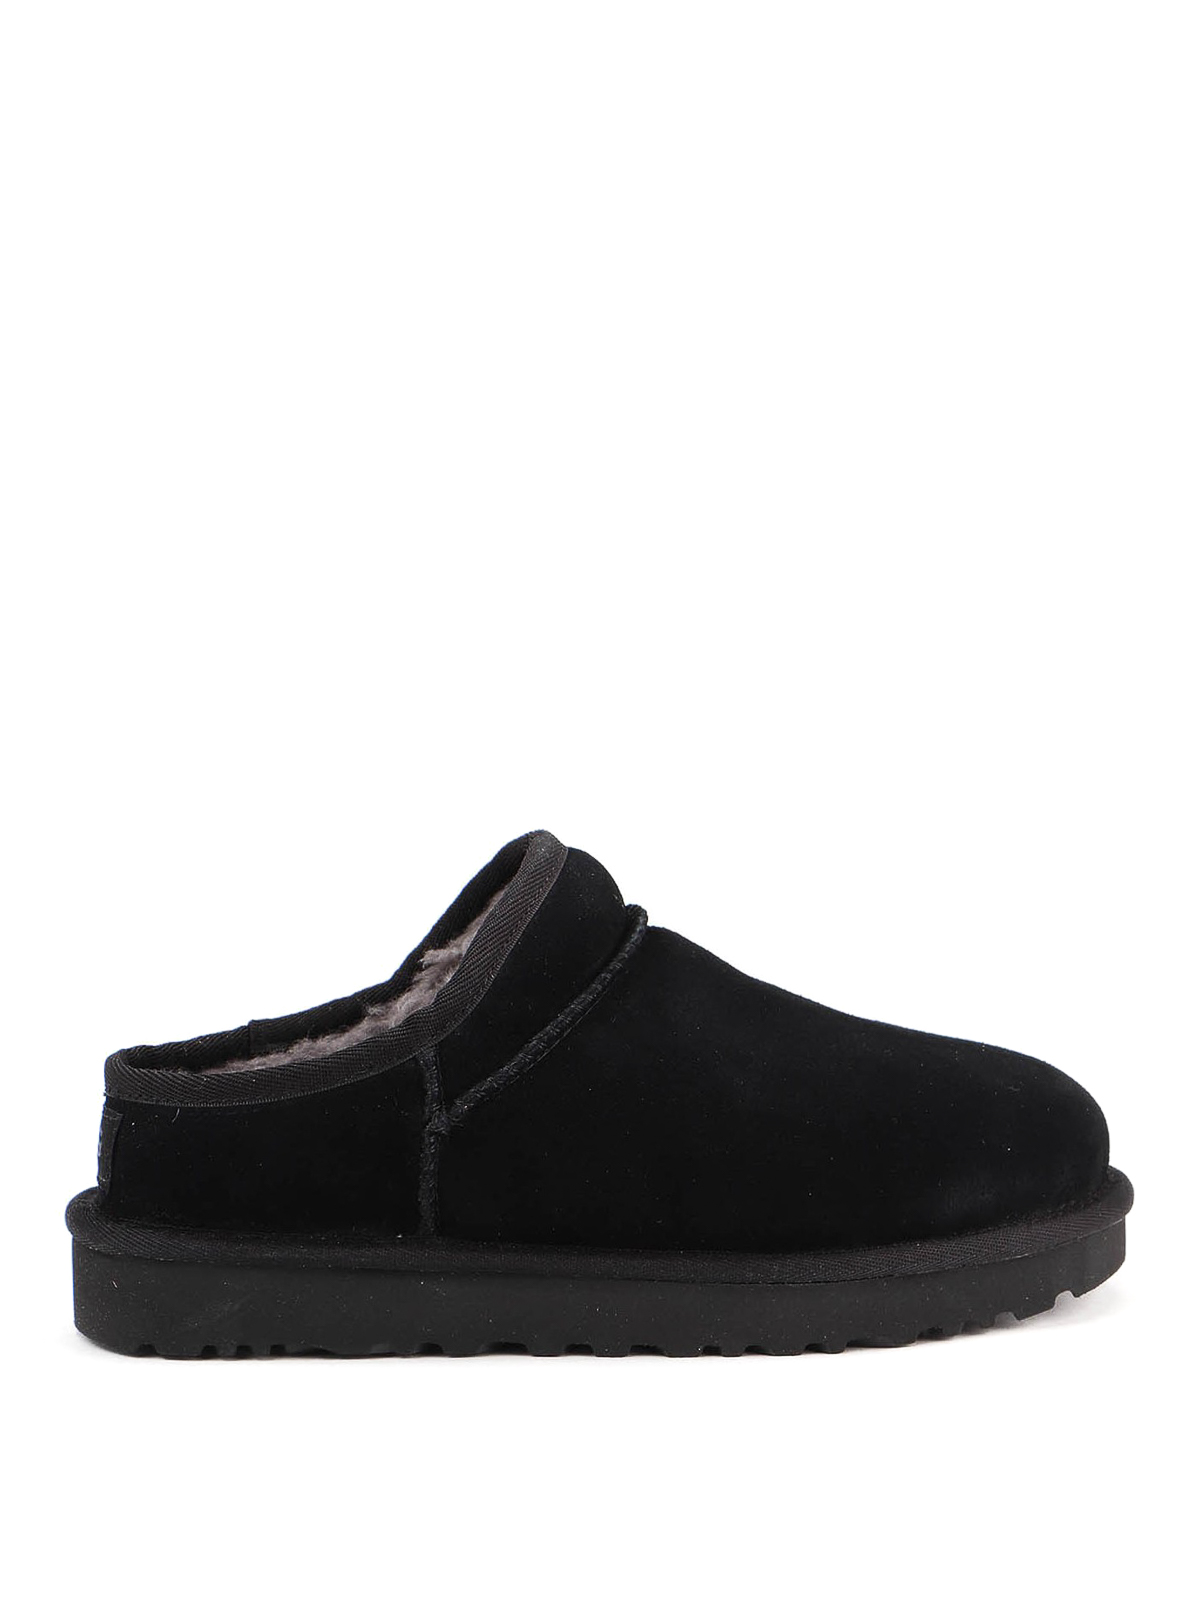 ugg loafers womens black